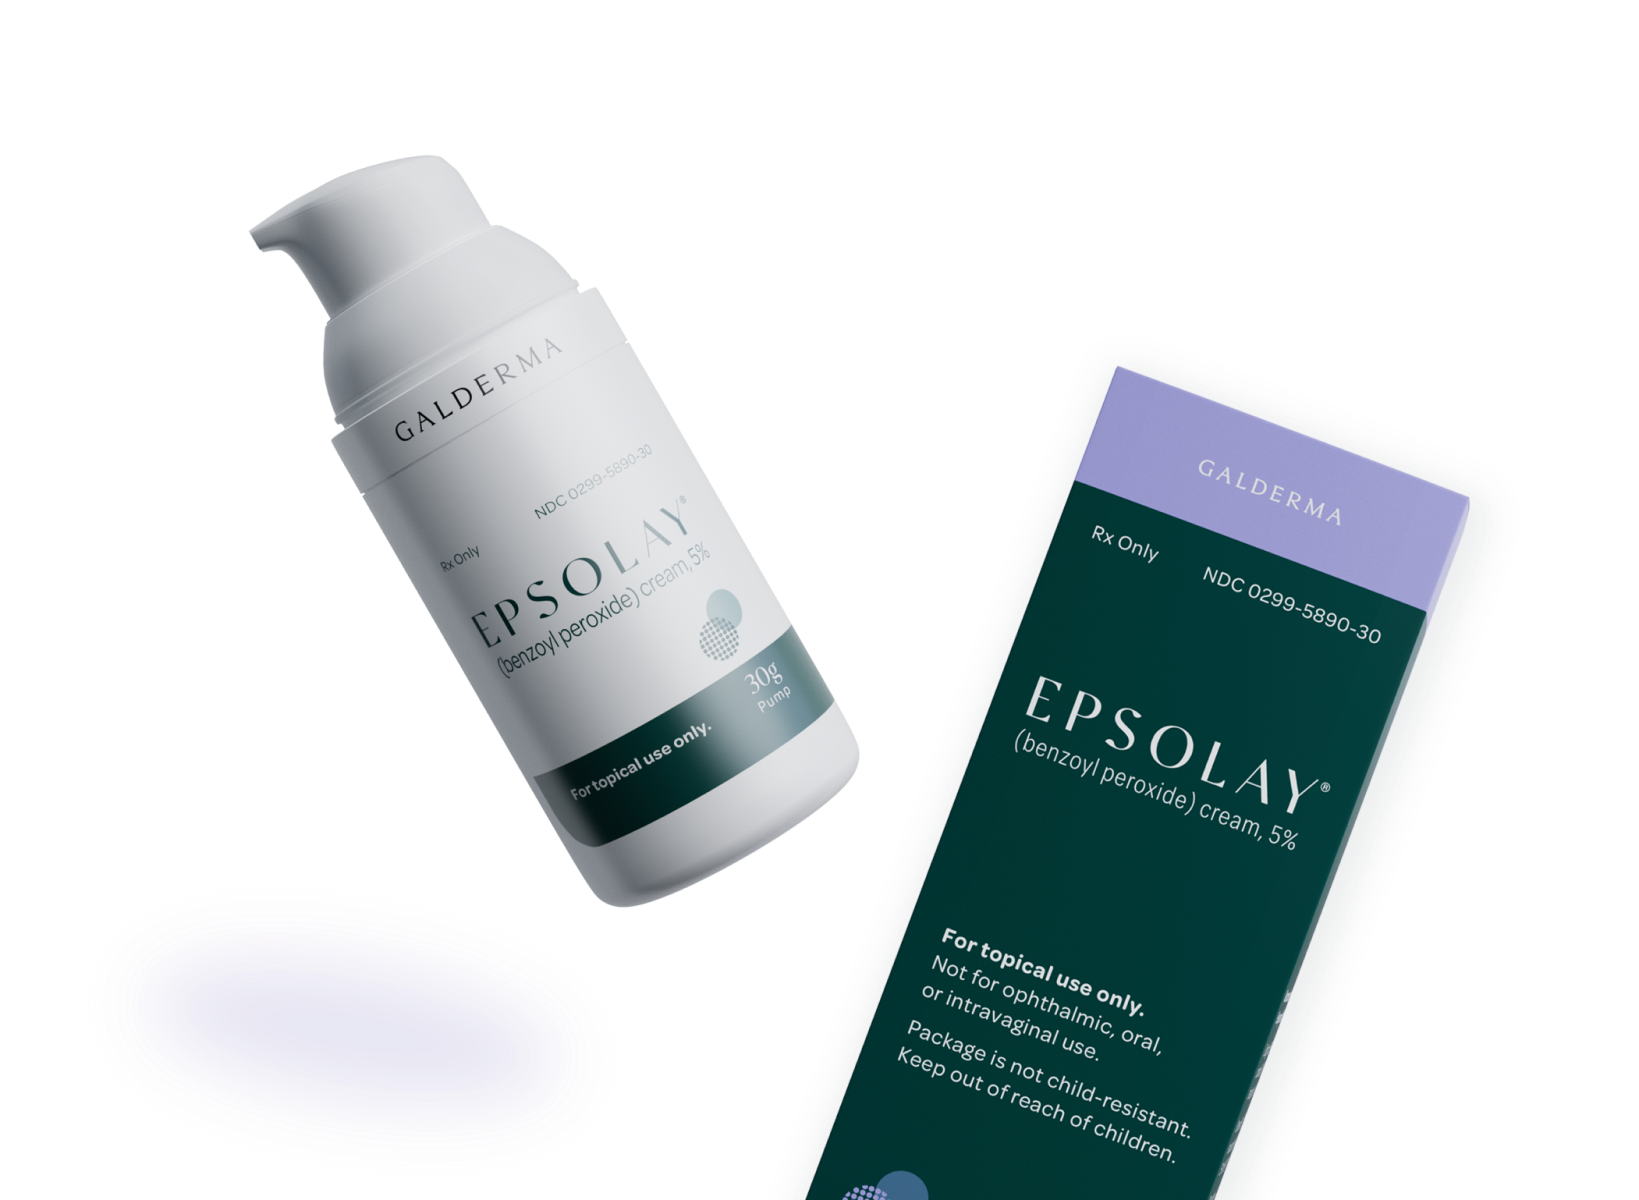 EPSOLAY cream bottle to the left with adjacent microencapsulation technology icon and product box on the right